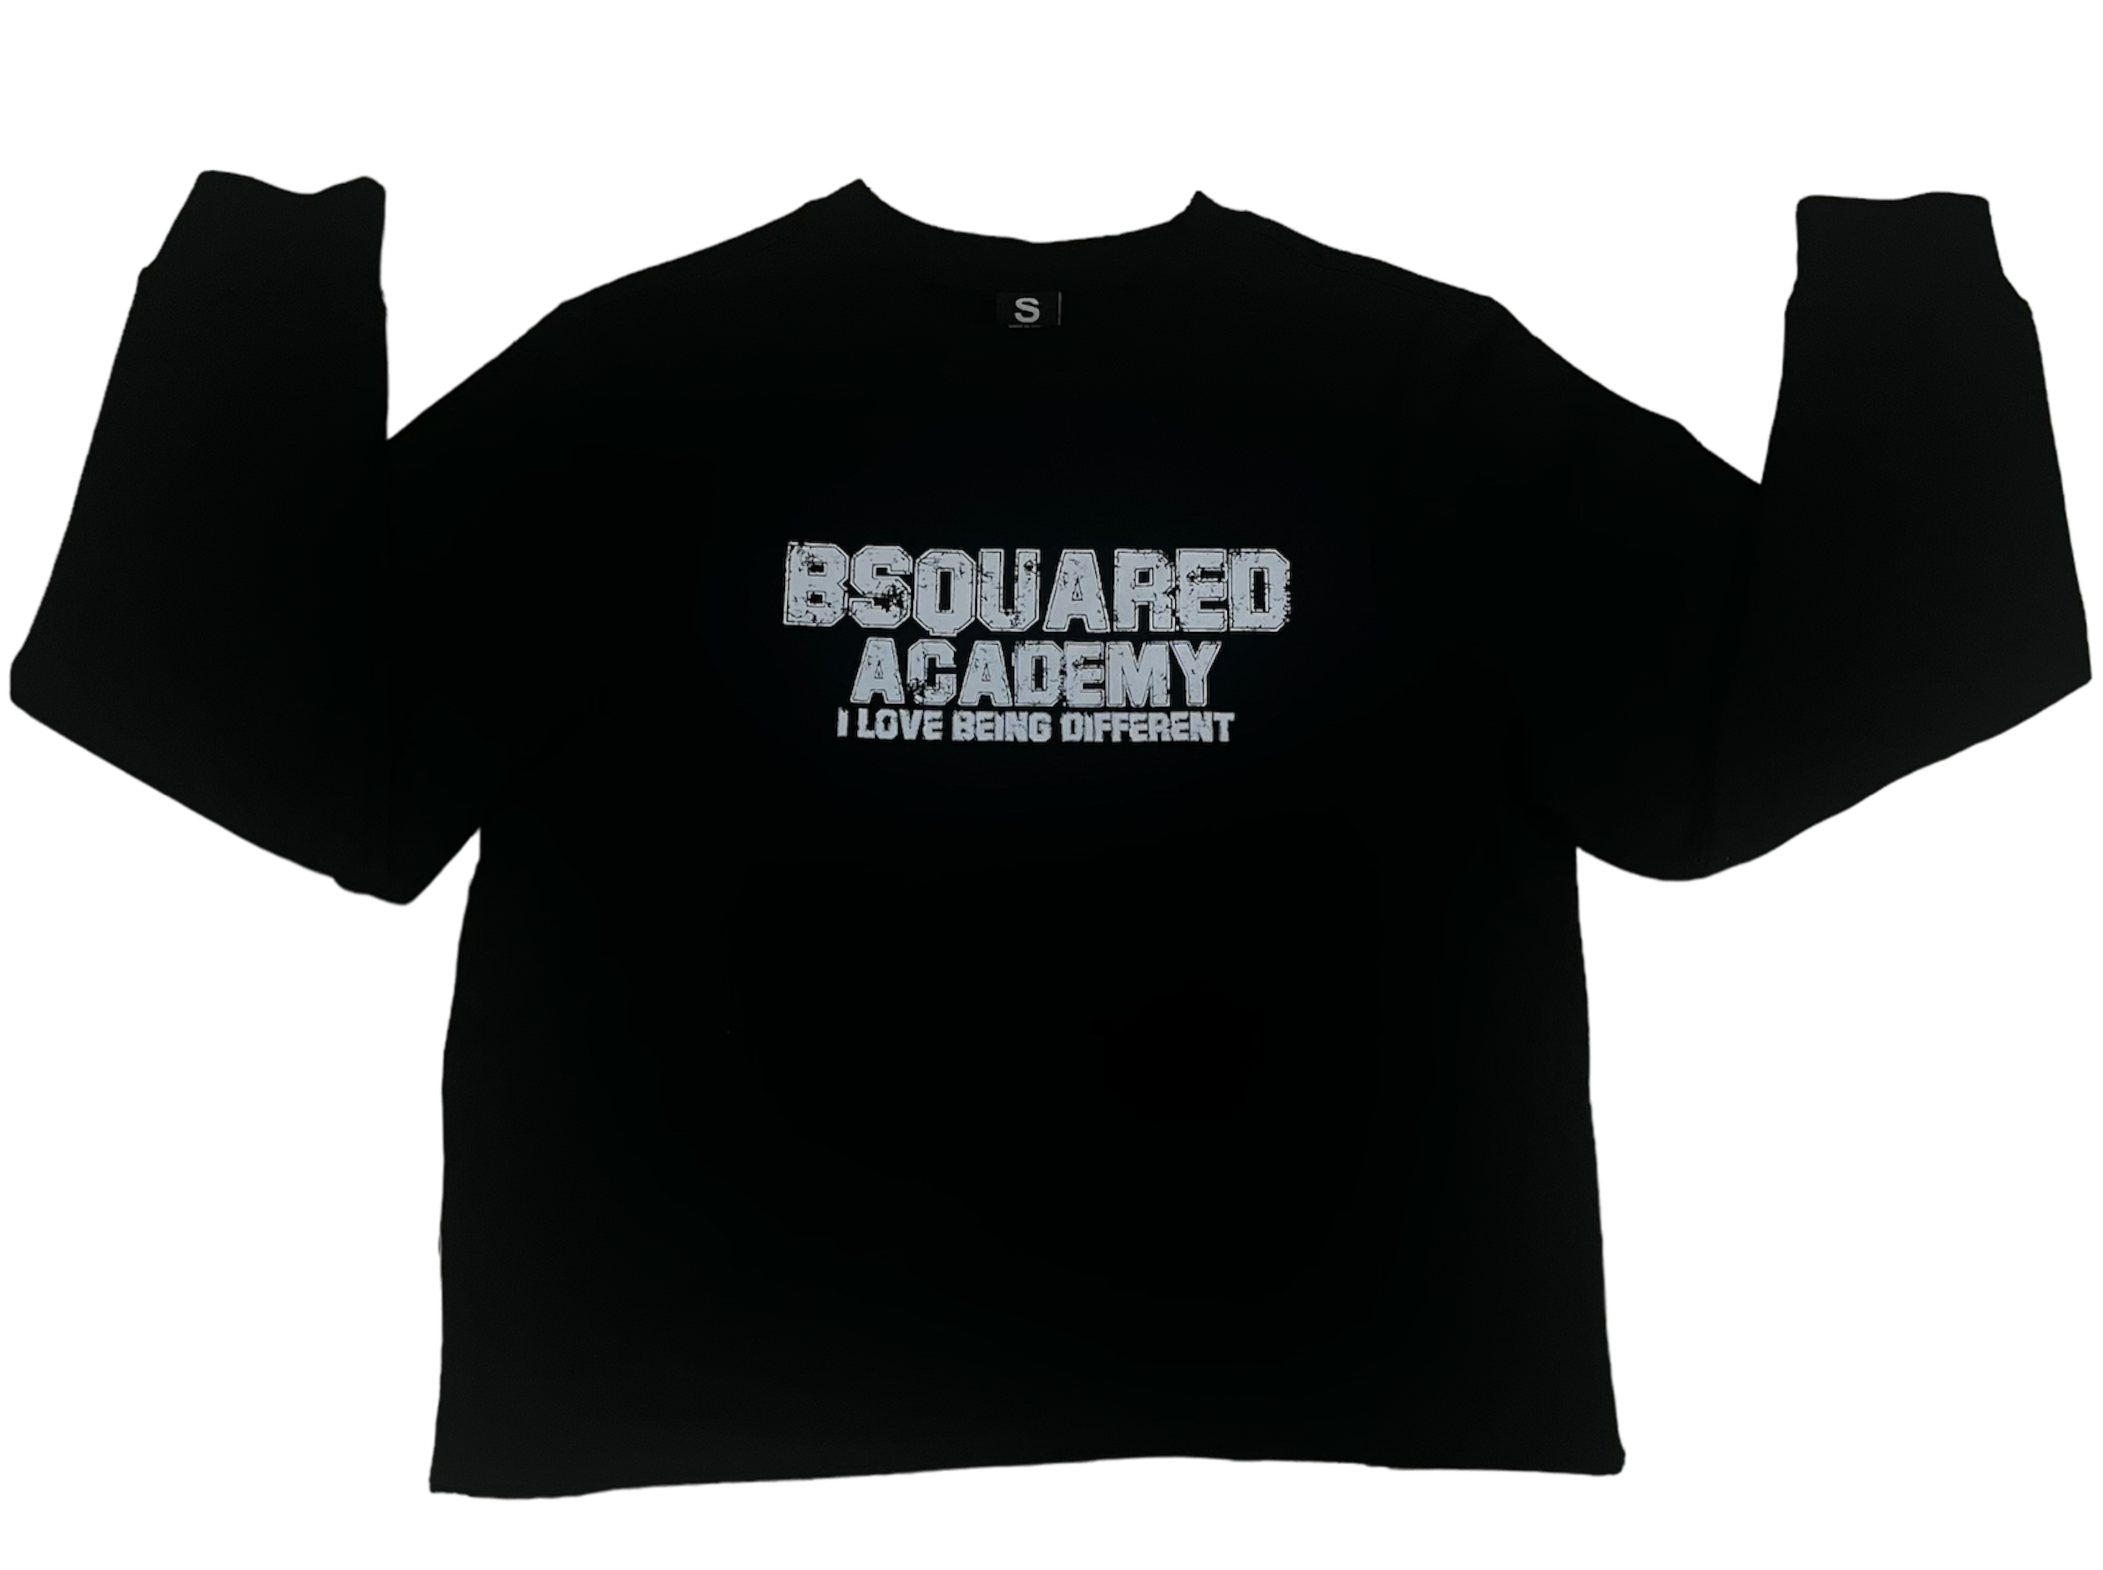 Bsquared Academy Sweater